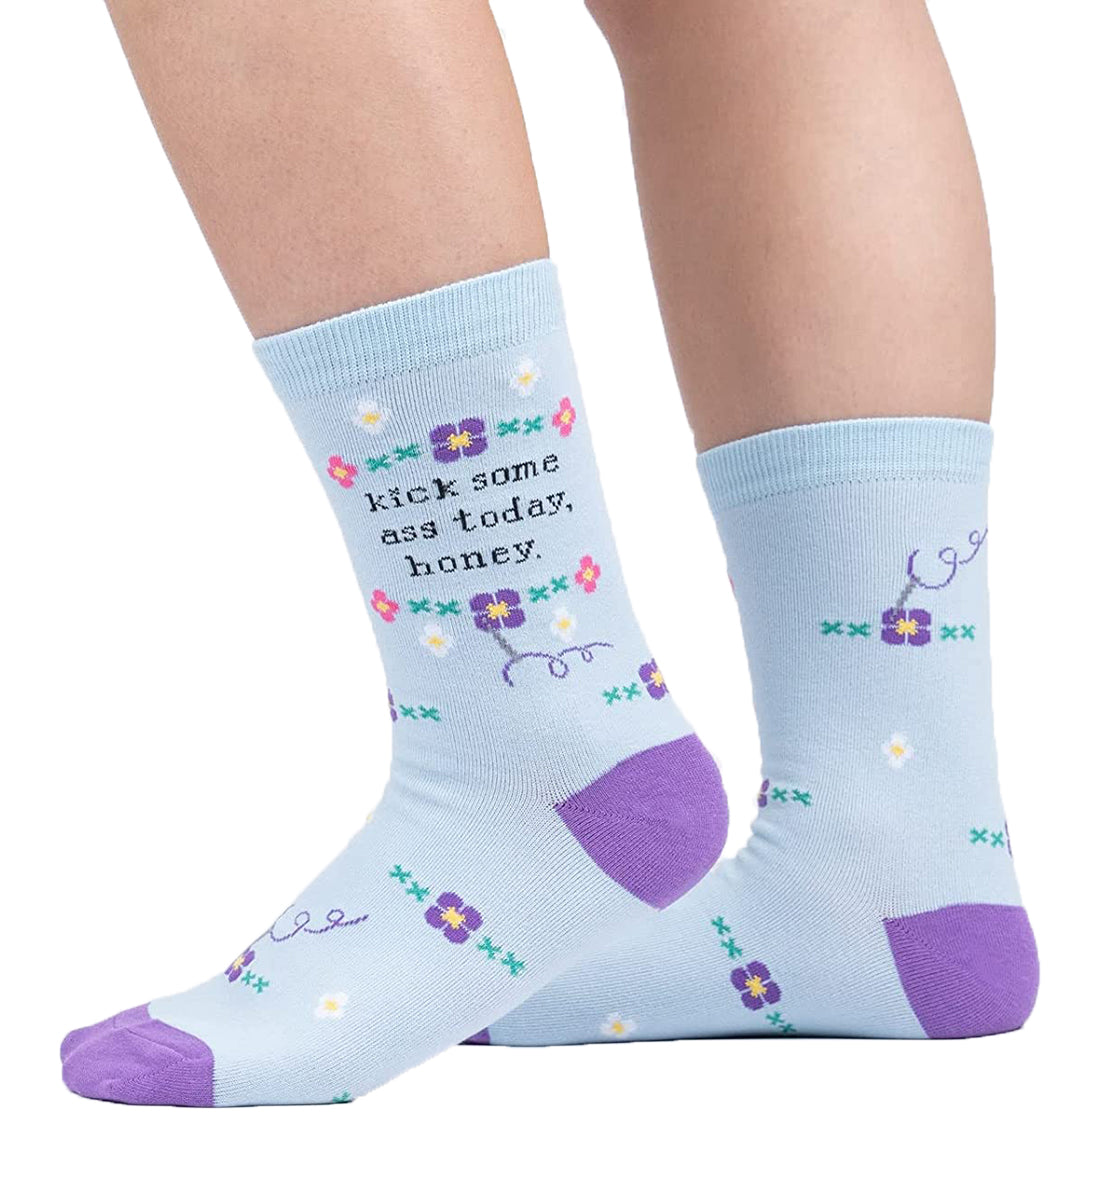 SOCK it to me Women's Crew Socks (W0409),Kick Some Ass Today - Kick Some Ass Today,One Size